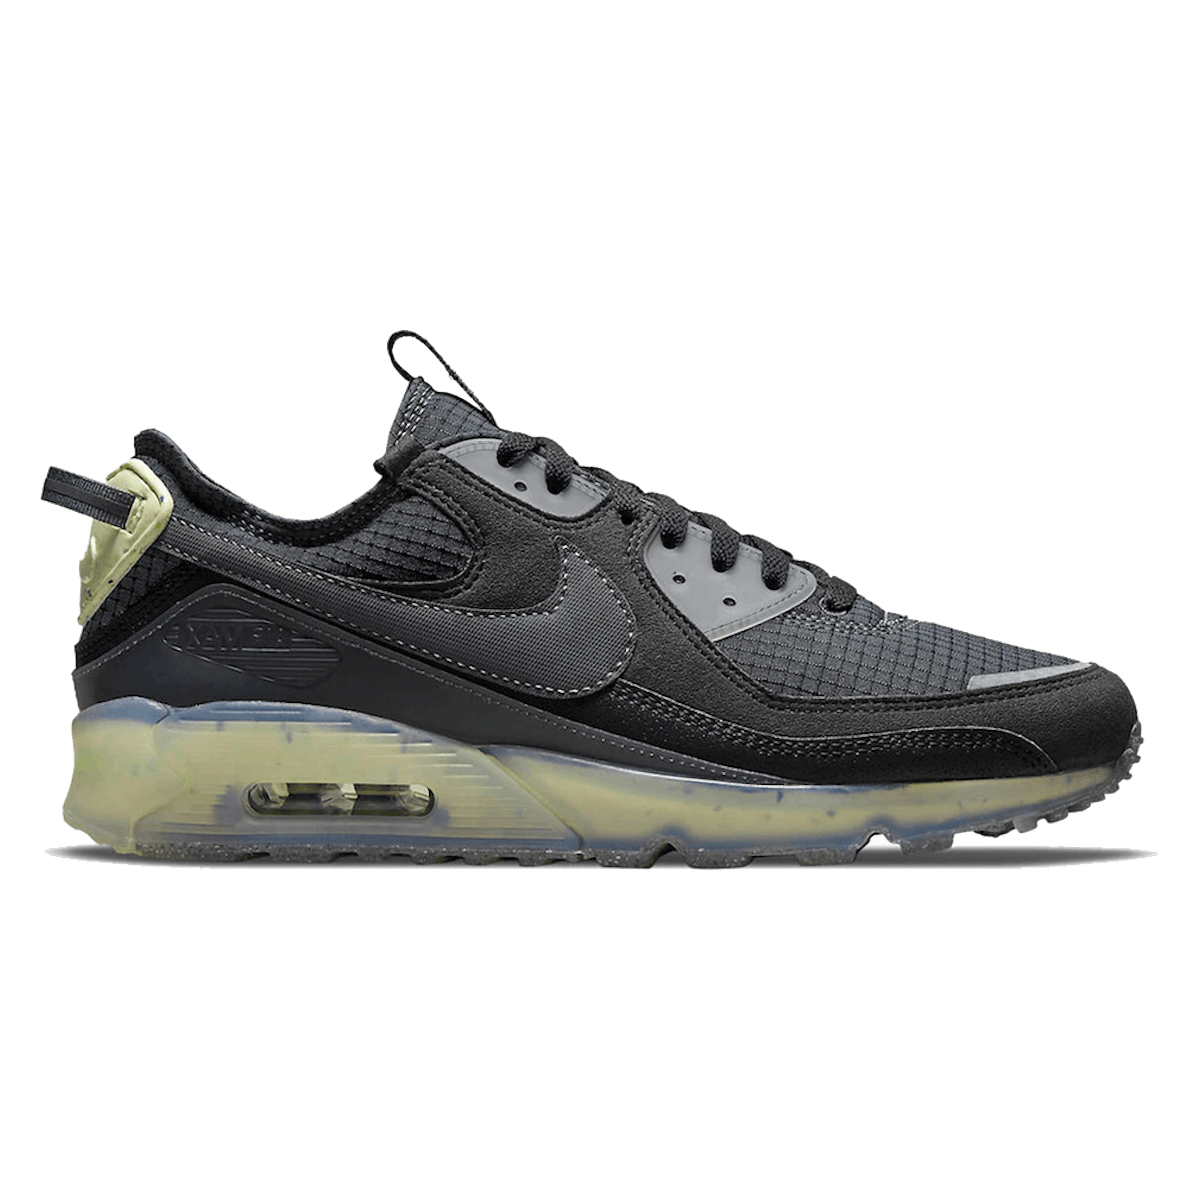 Nike Air Max 90 Terrascape "Black Lime Ice"